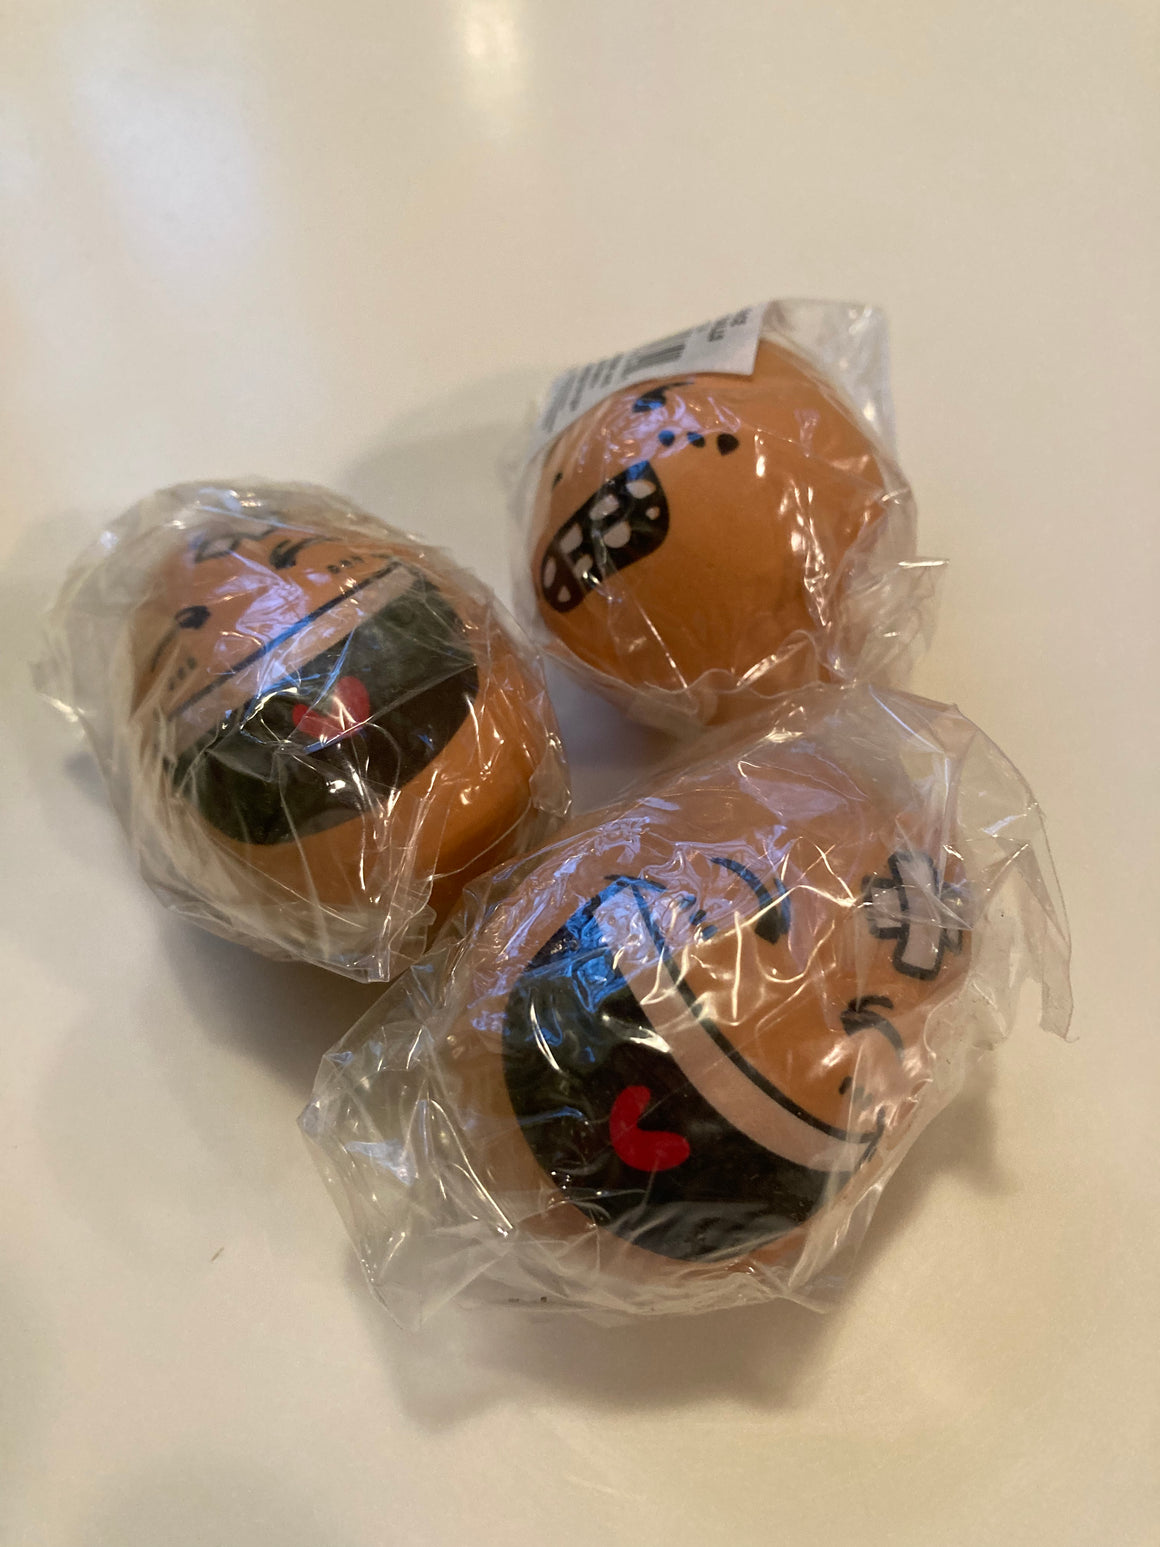 12 Rubber Eggs WITH faces on one side